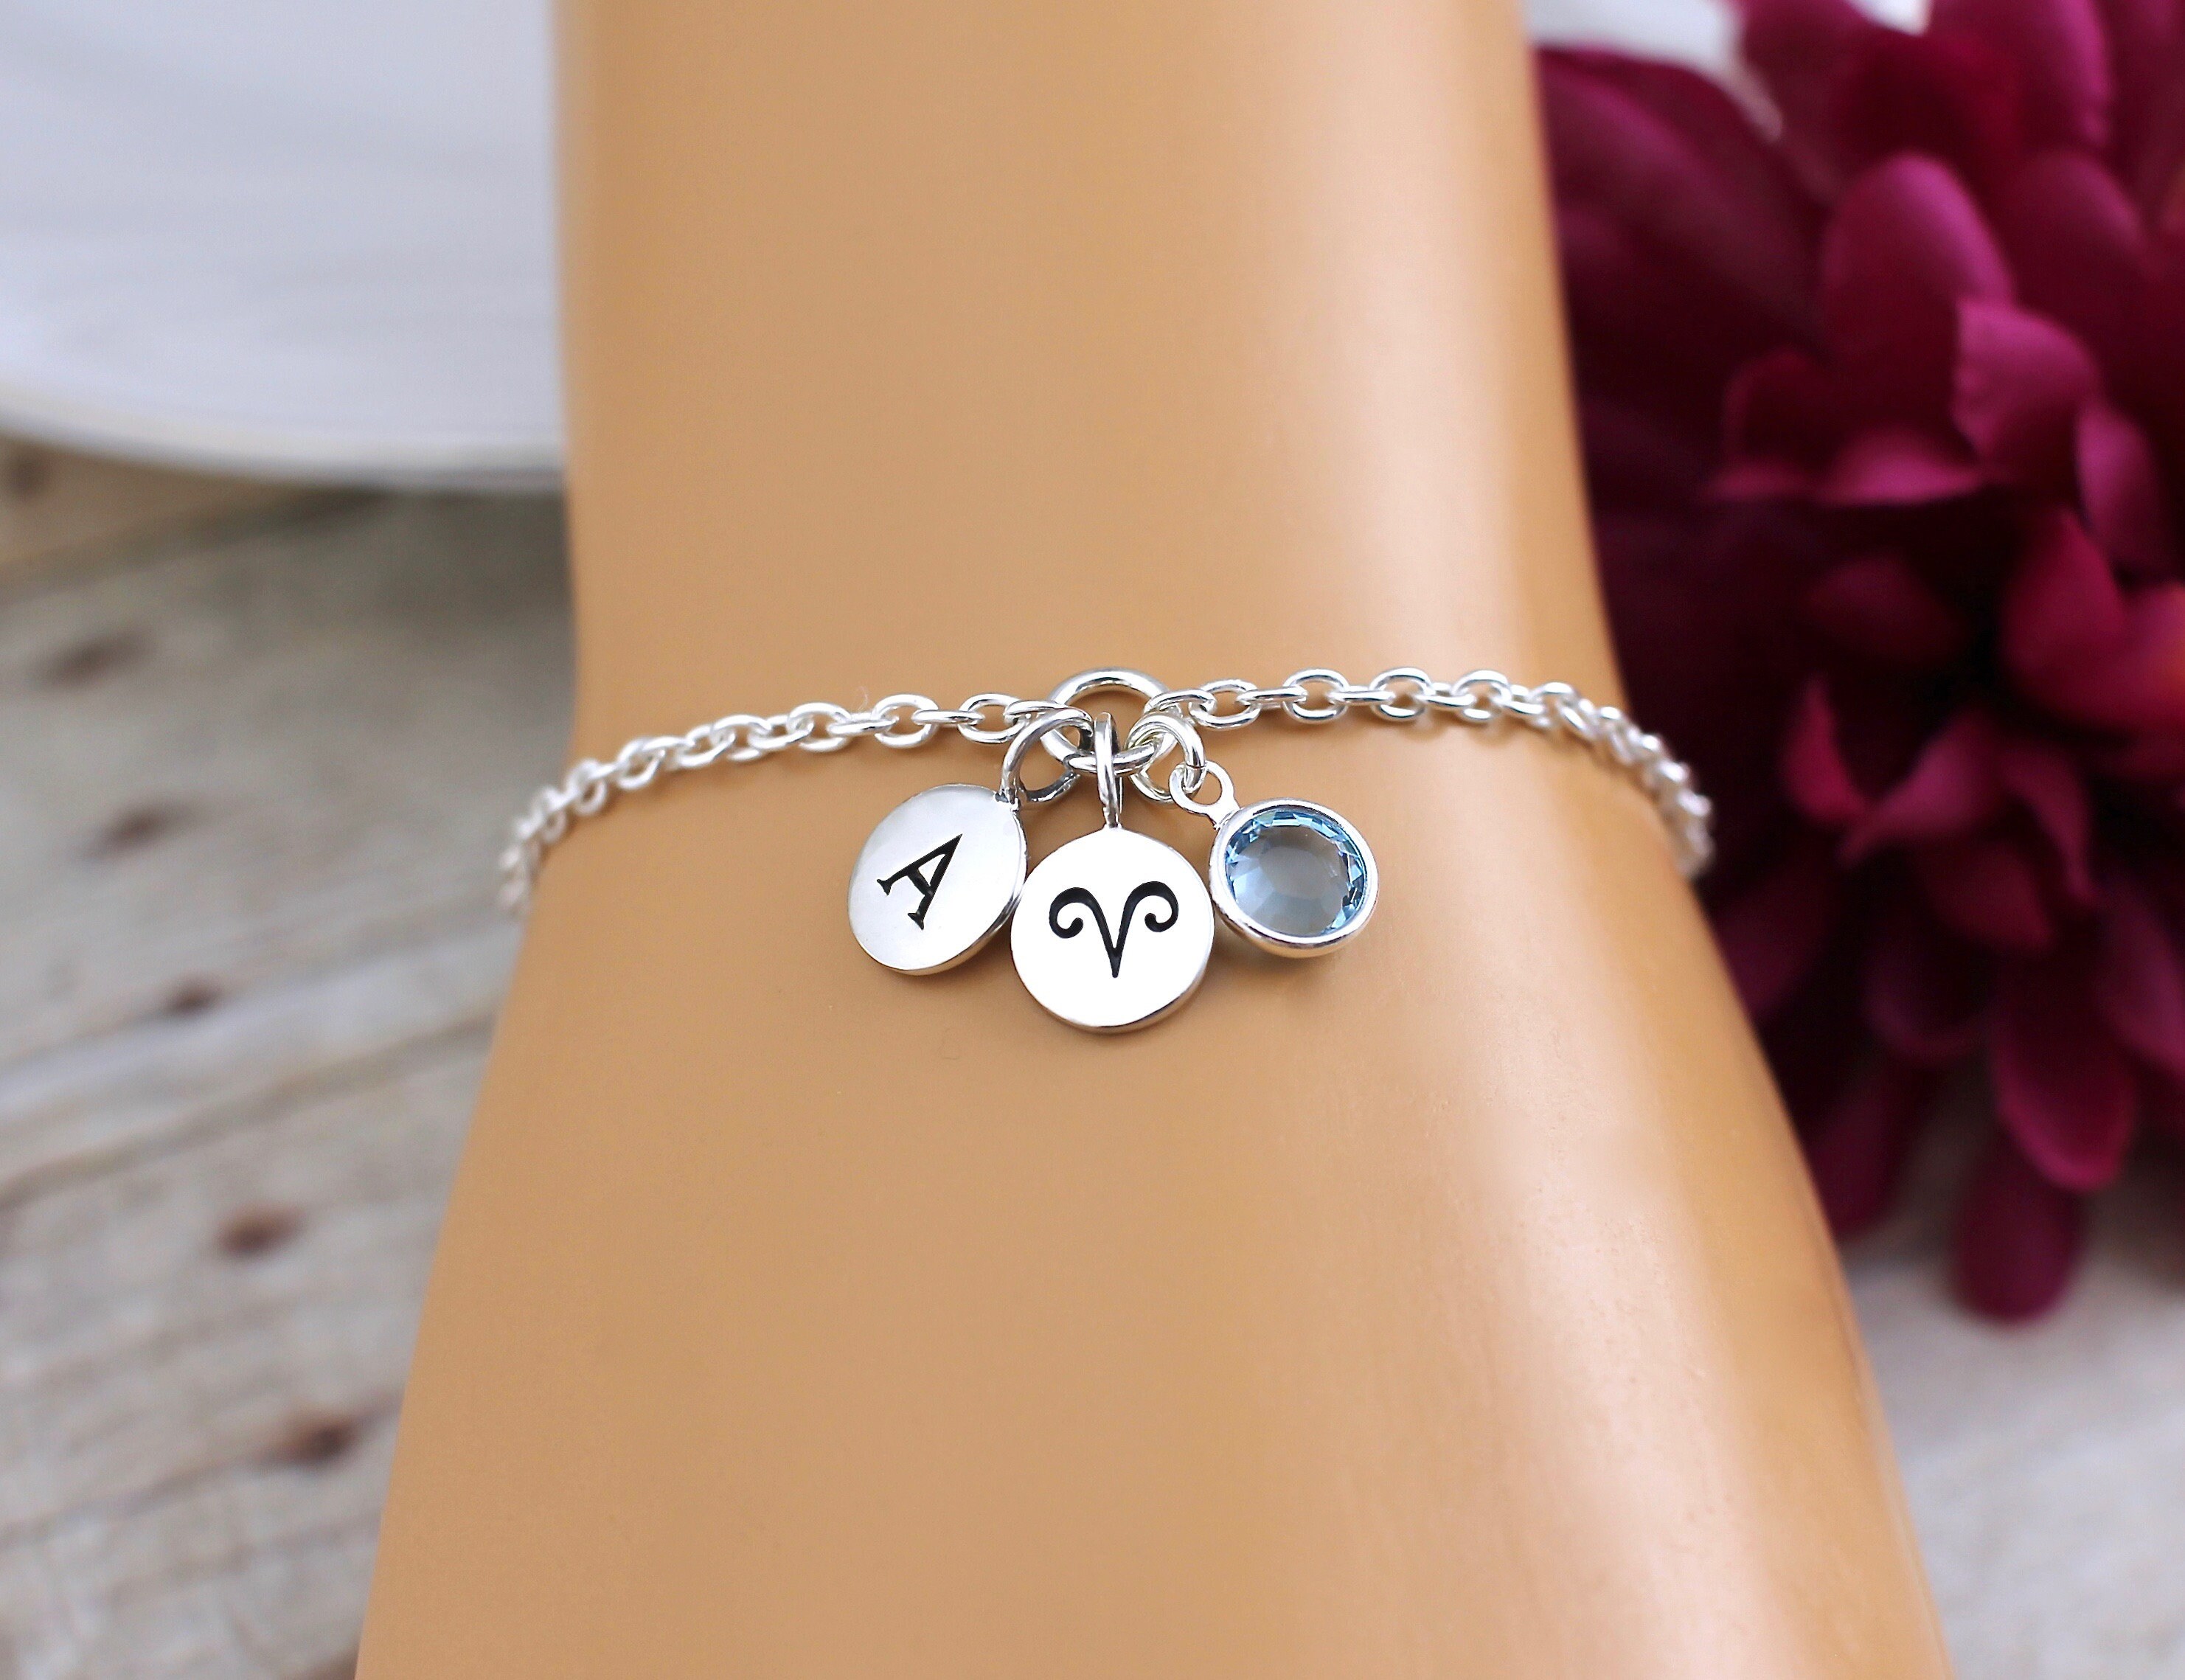 Aries Bracelet, Gifts For Women, Jewelry Sterling Silver, Star Sign, Zodiac Gift, Birthday Birthstone